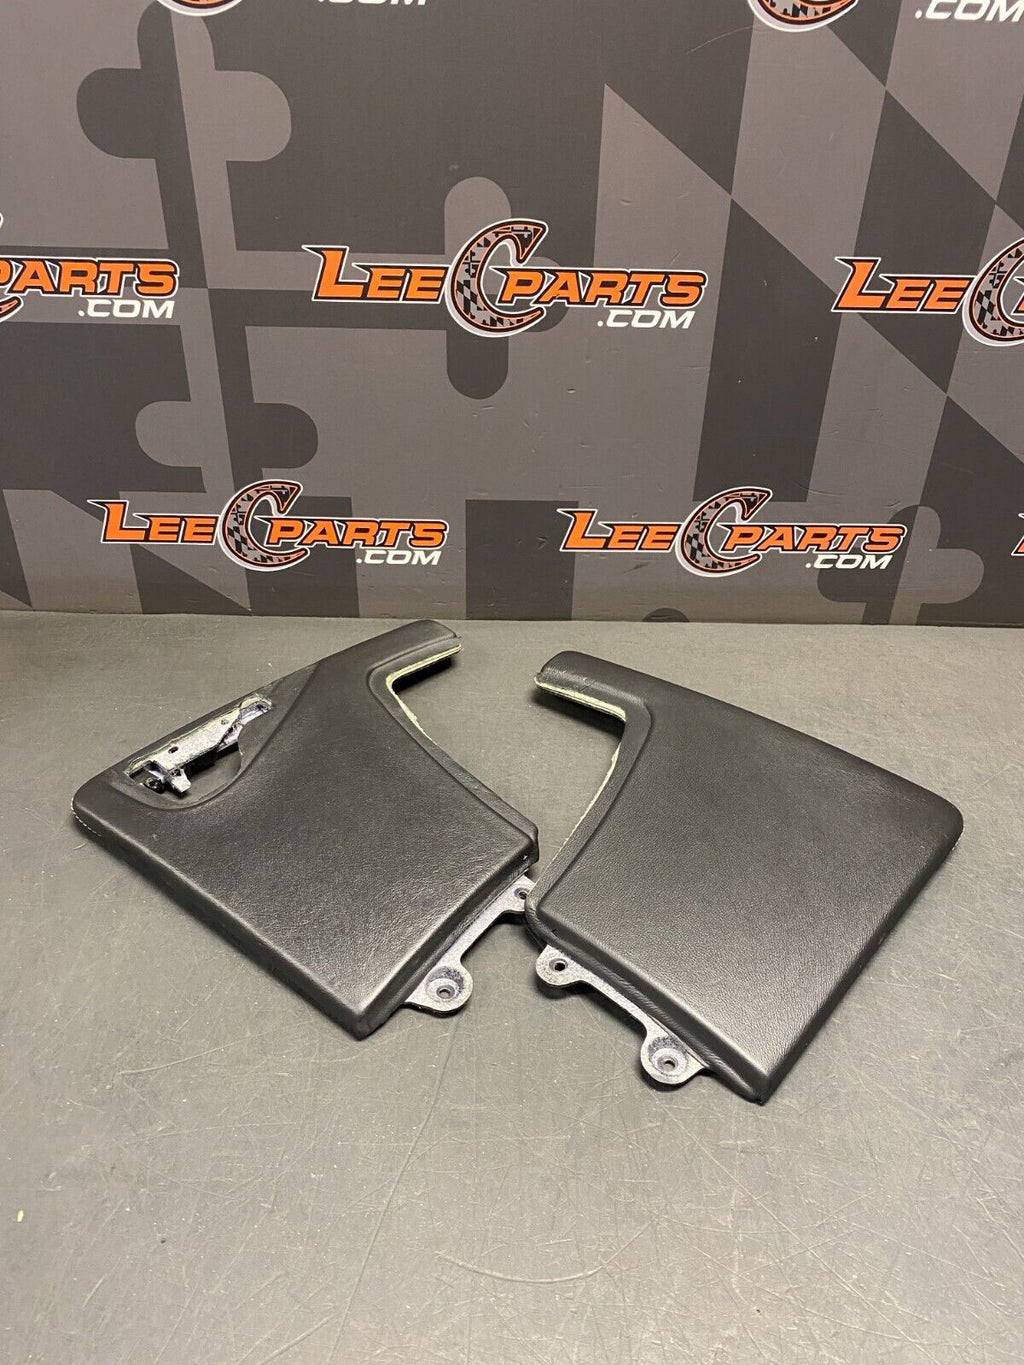 2007 PORSCHE 911 TURBO 997.1 OEM LEATHER KNEE KICK PANELS SIDE CONSOLE PAIR USED